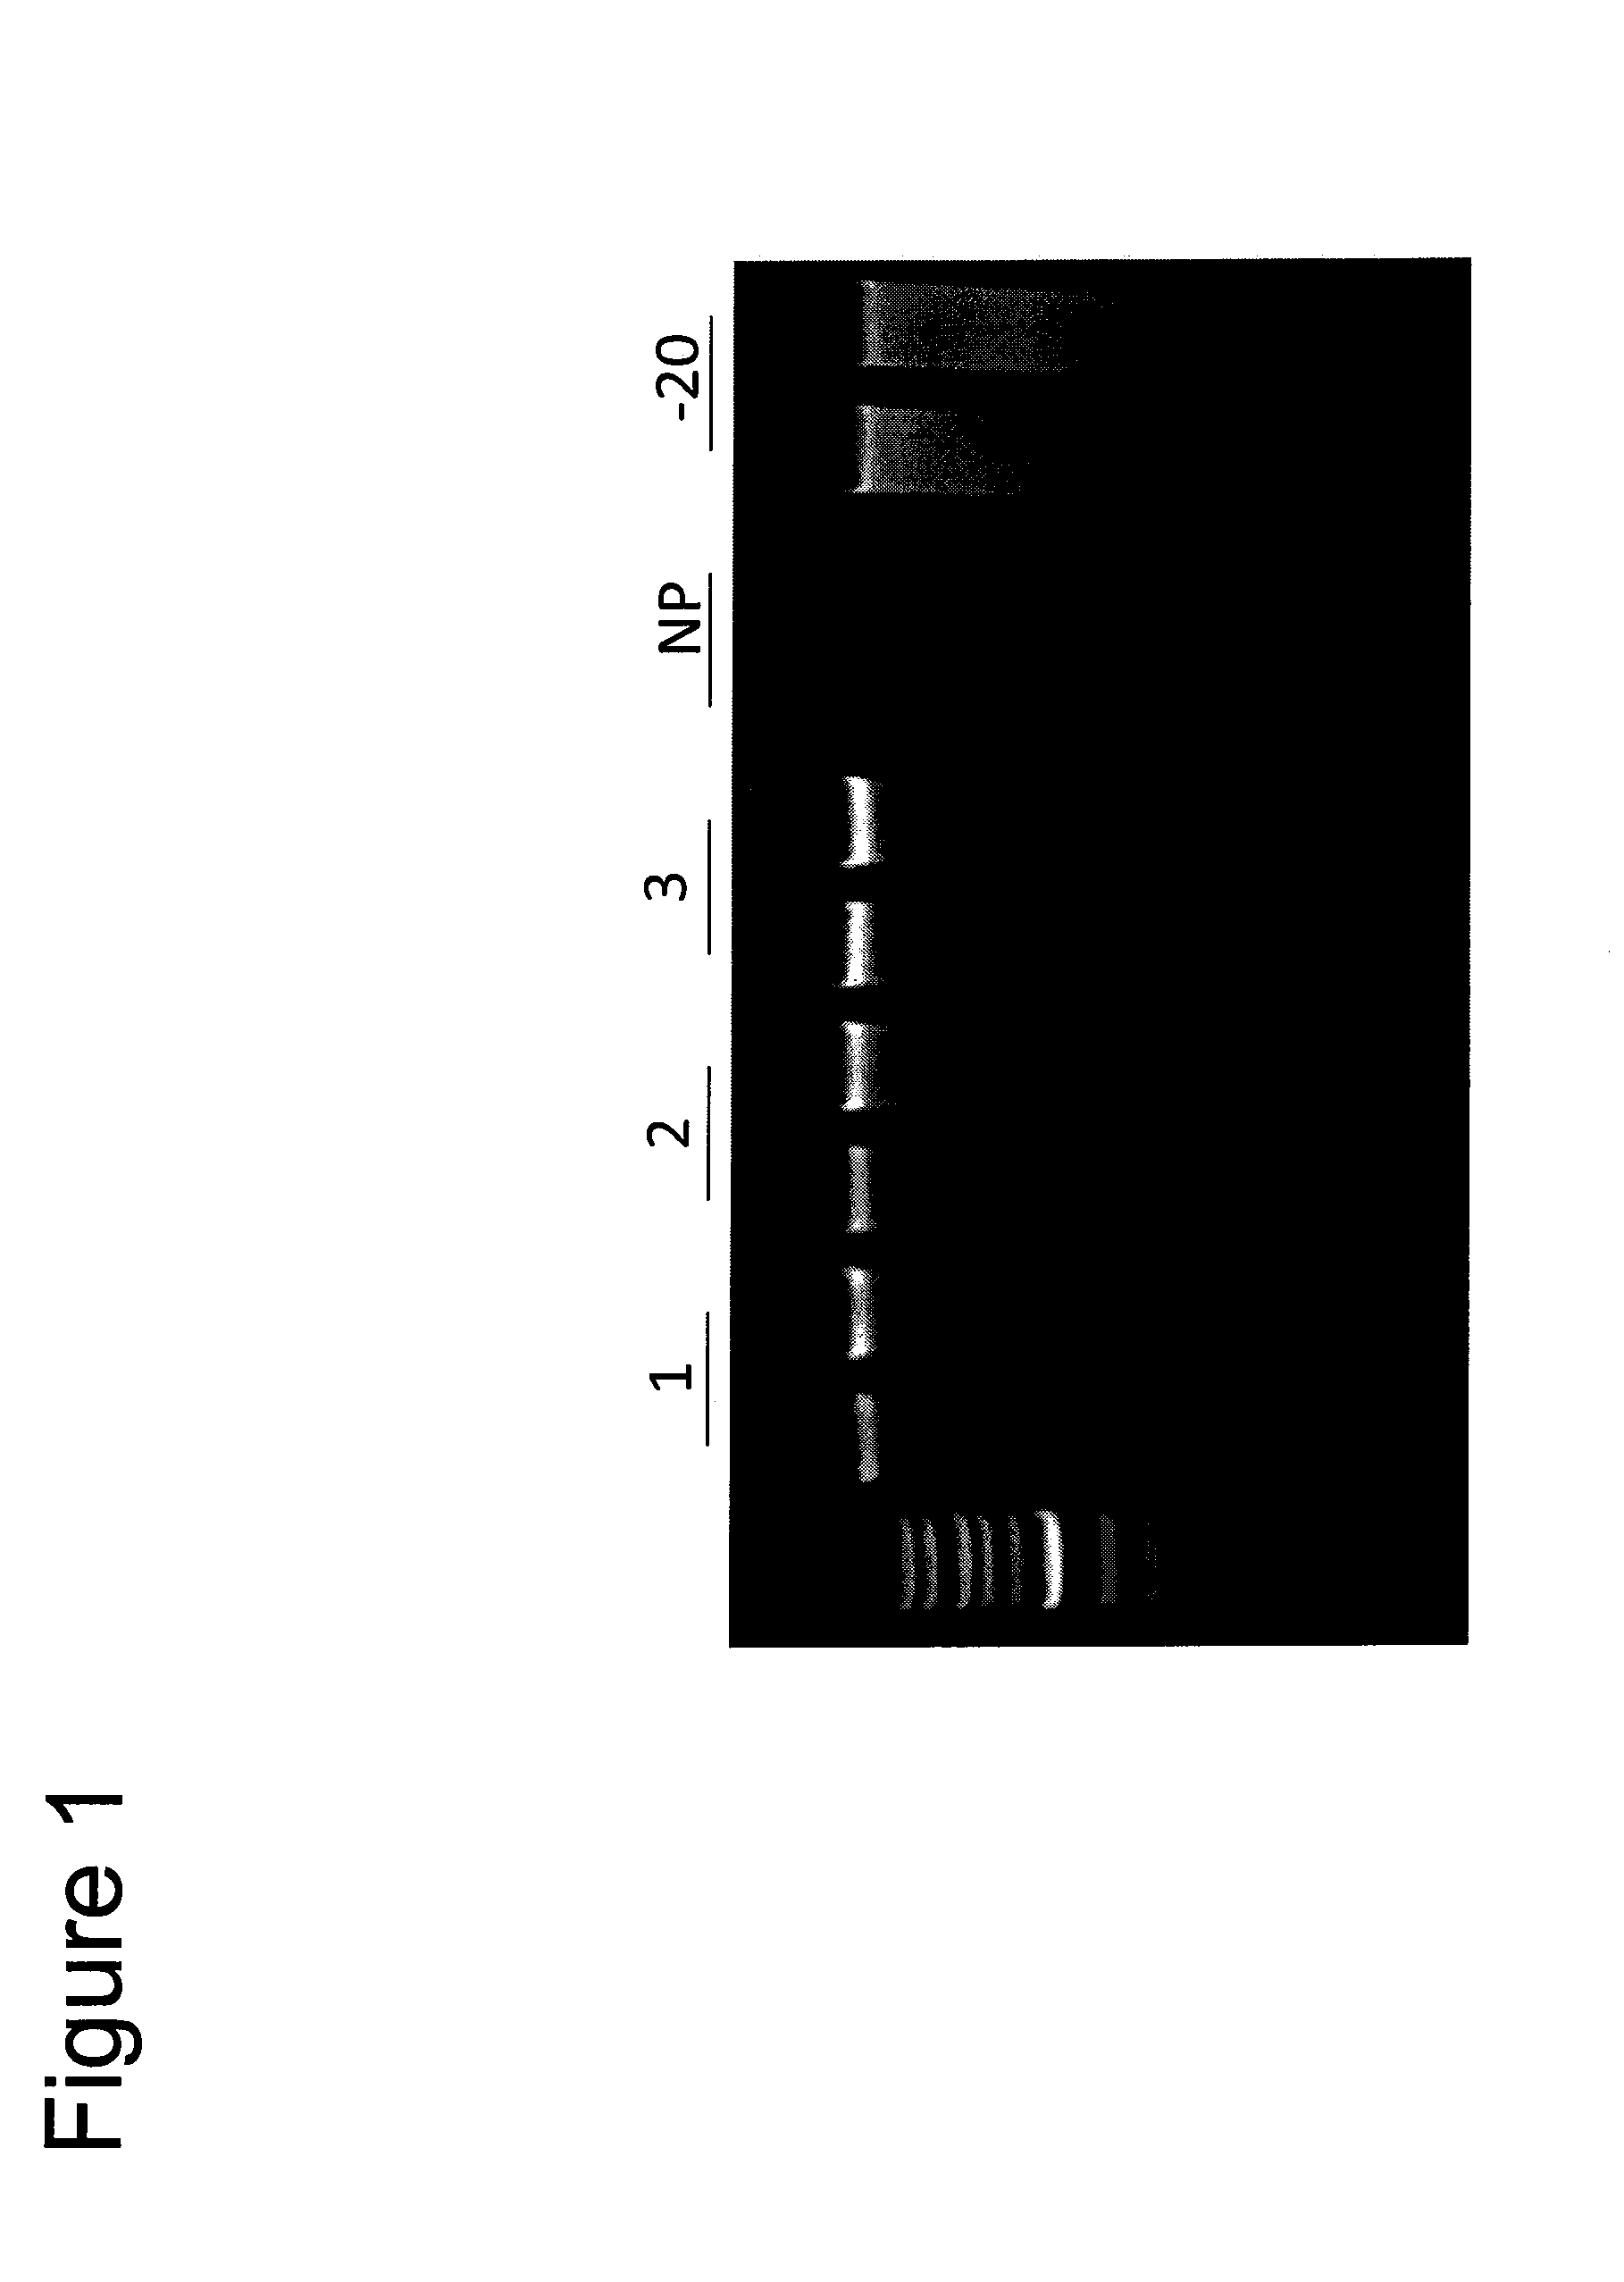 Compositions for stabilizing DNA, RNA and proteins in saliva and other biological samples during shipping and storage at ambient temperatures